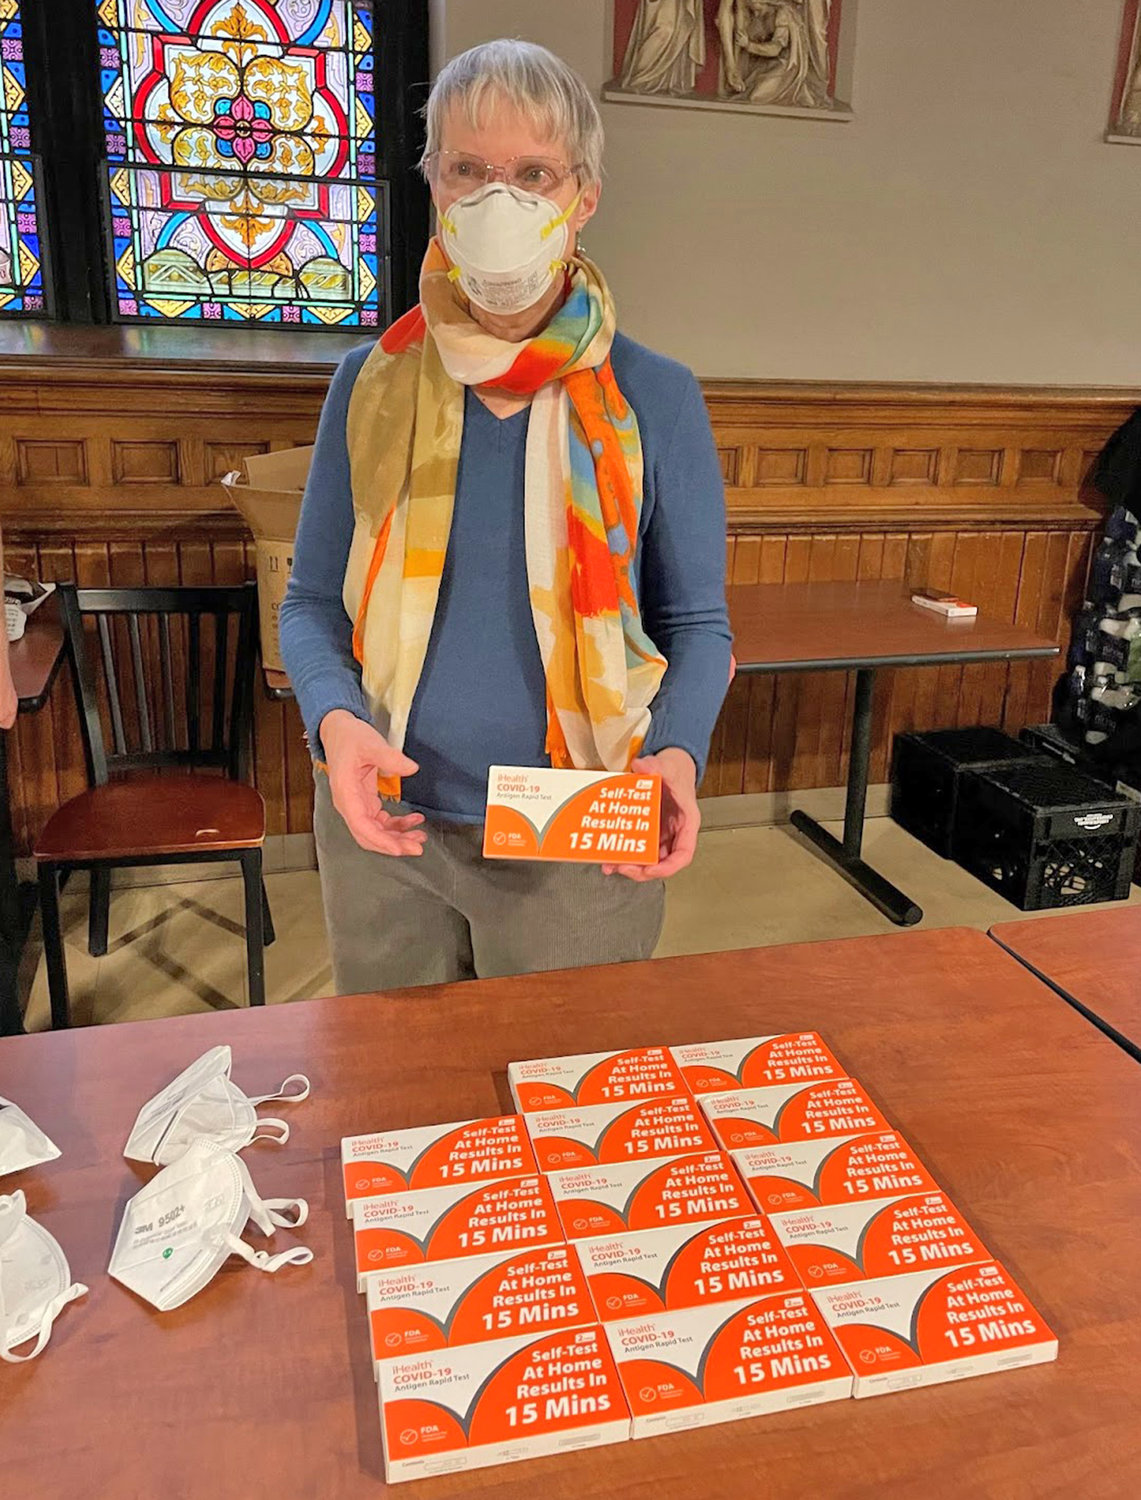 GETTING ORGANIZED — State Sen. Rachel May, D-53, Syracuse, puts together a display of at-home COVID-19 test kits which were to be given away at her annual Martin Luther King Jr. Day of Service event at the Samaritan Center in Syracuse on Monday.